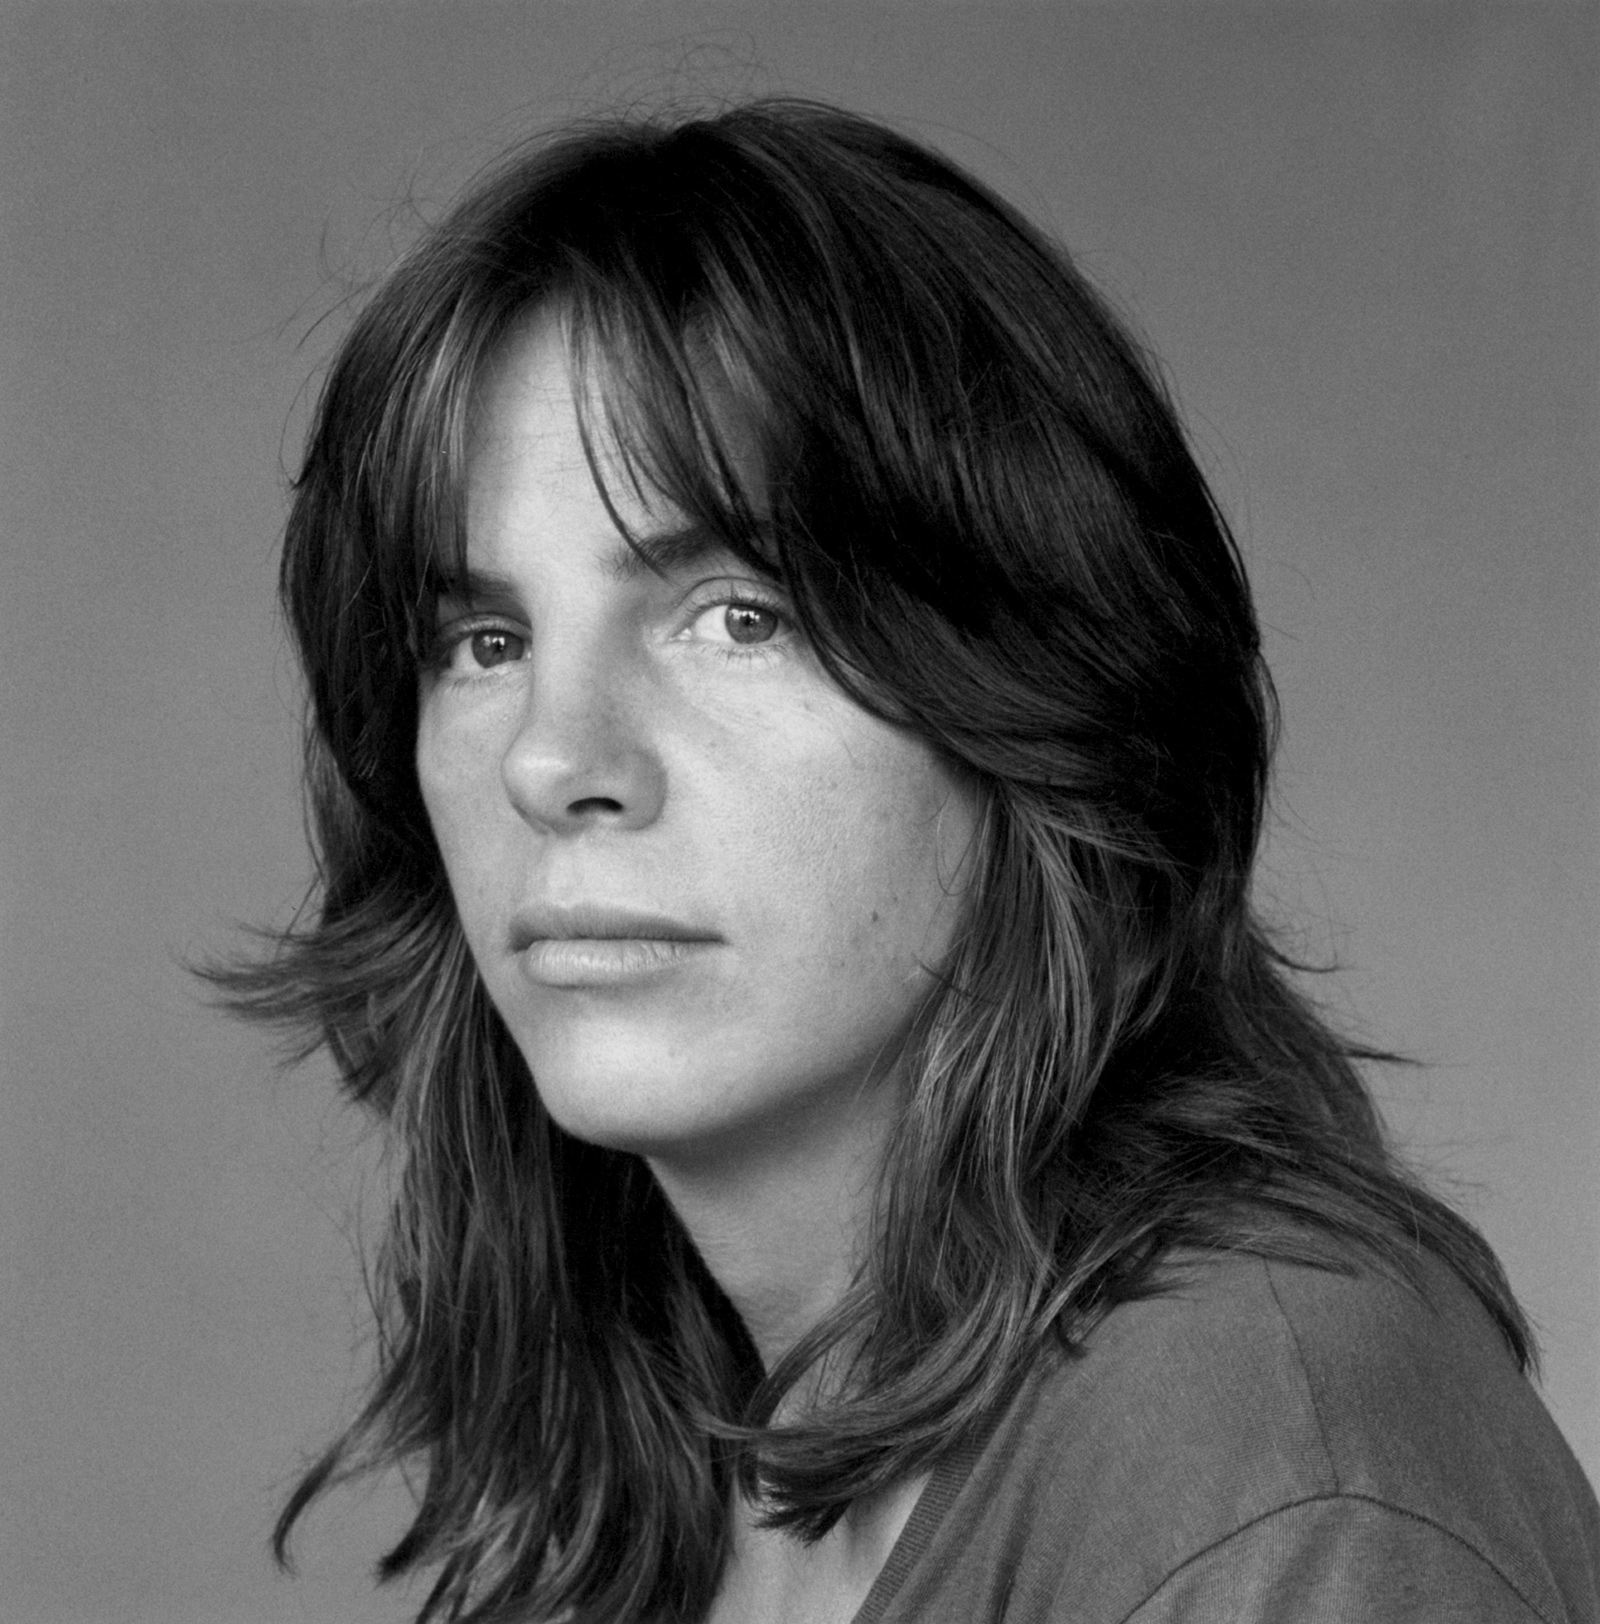 Eileen Myles, 1980; photograph by Robert Mapplethorpe, from the cover of Chelsea Girls